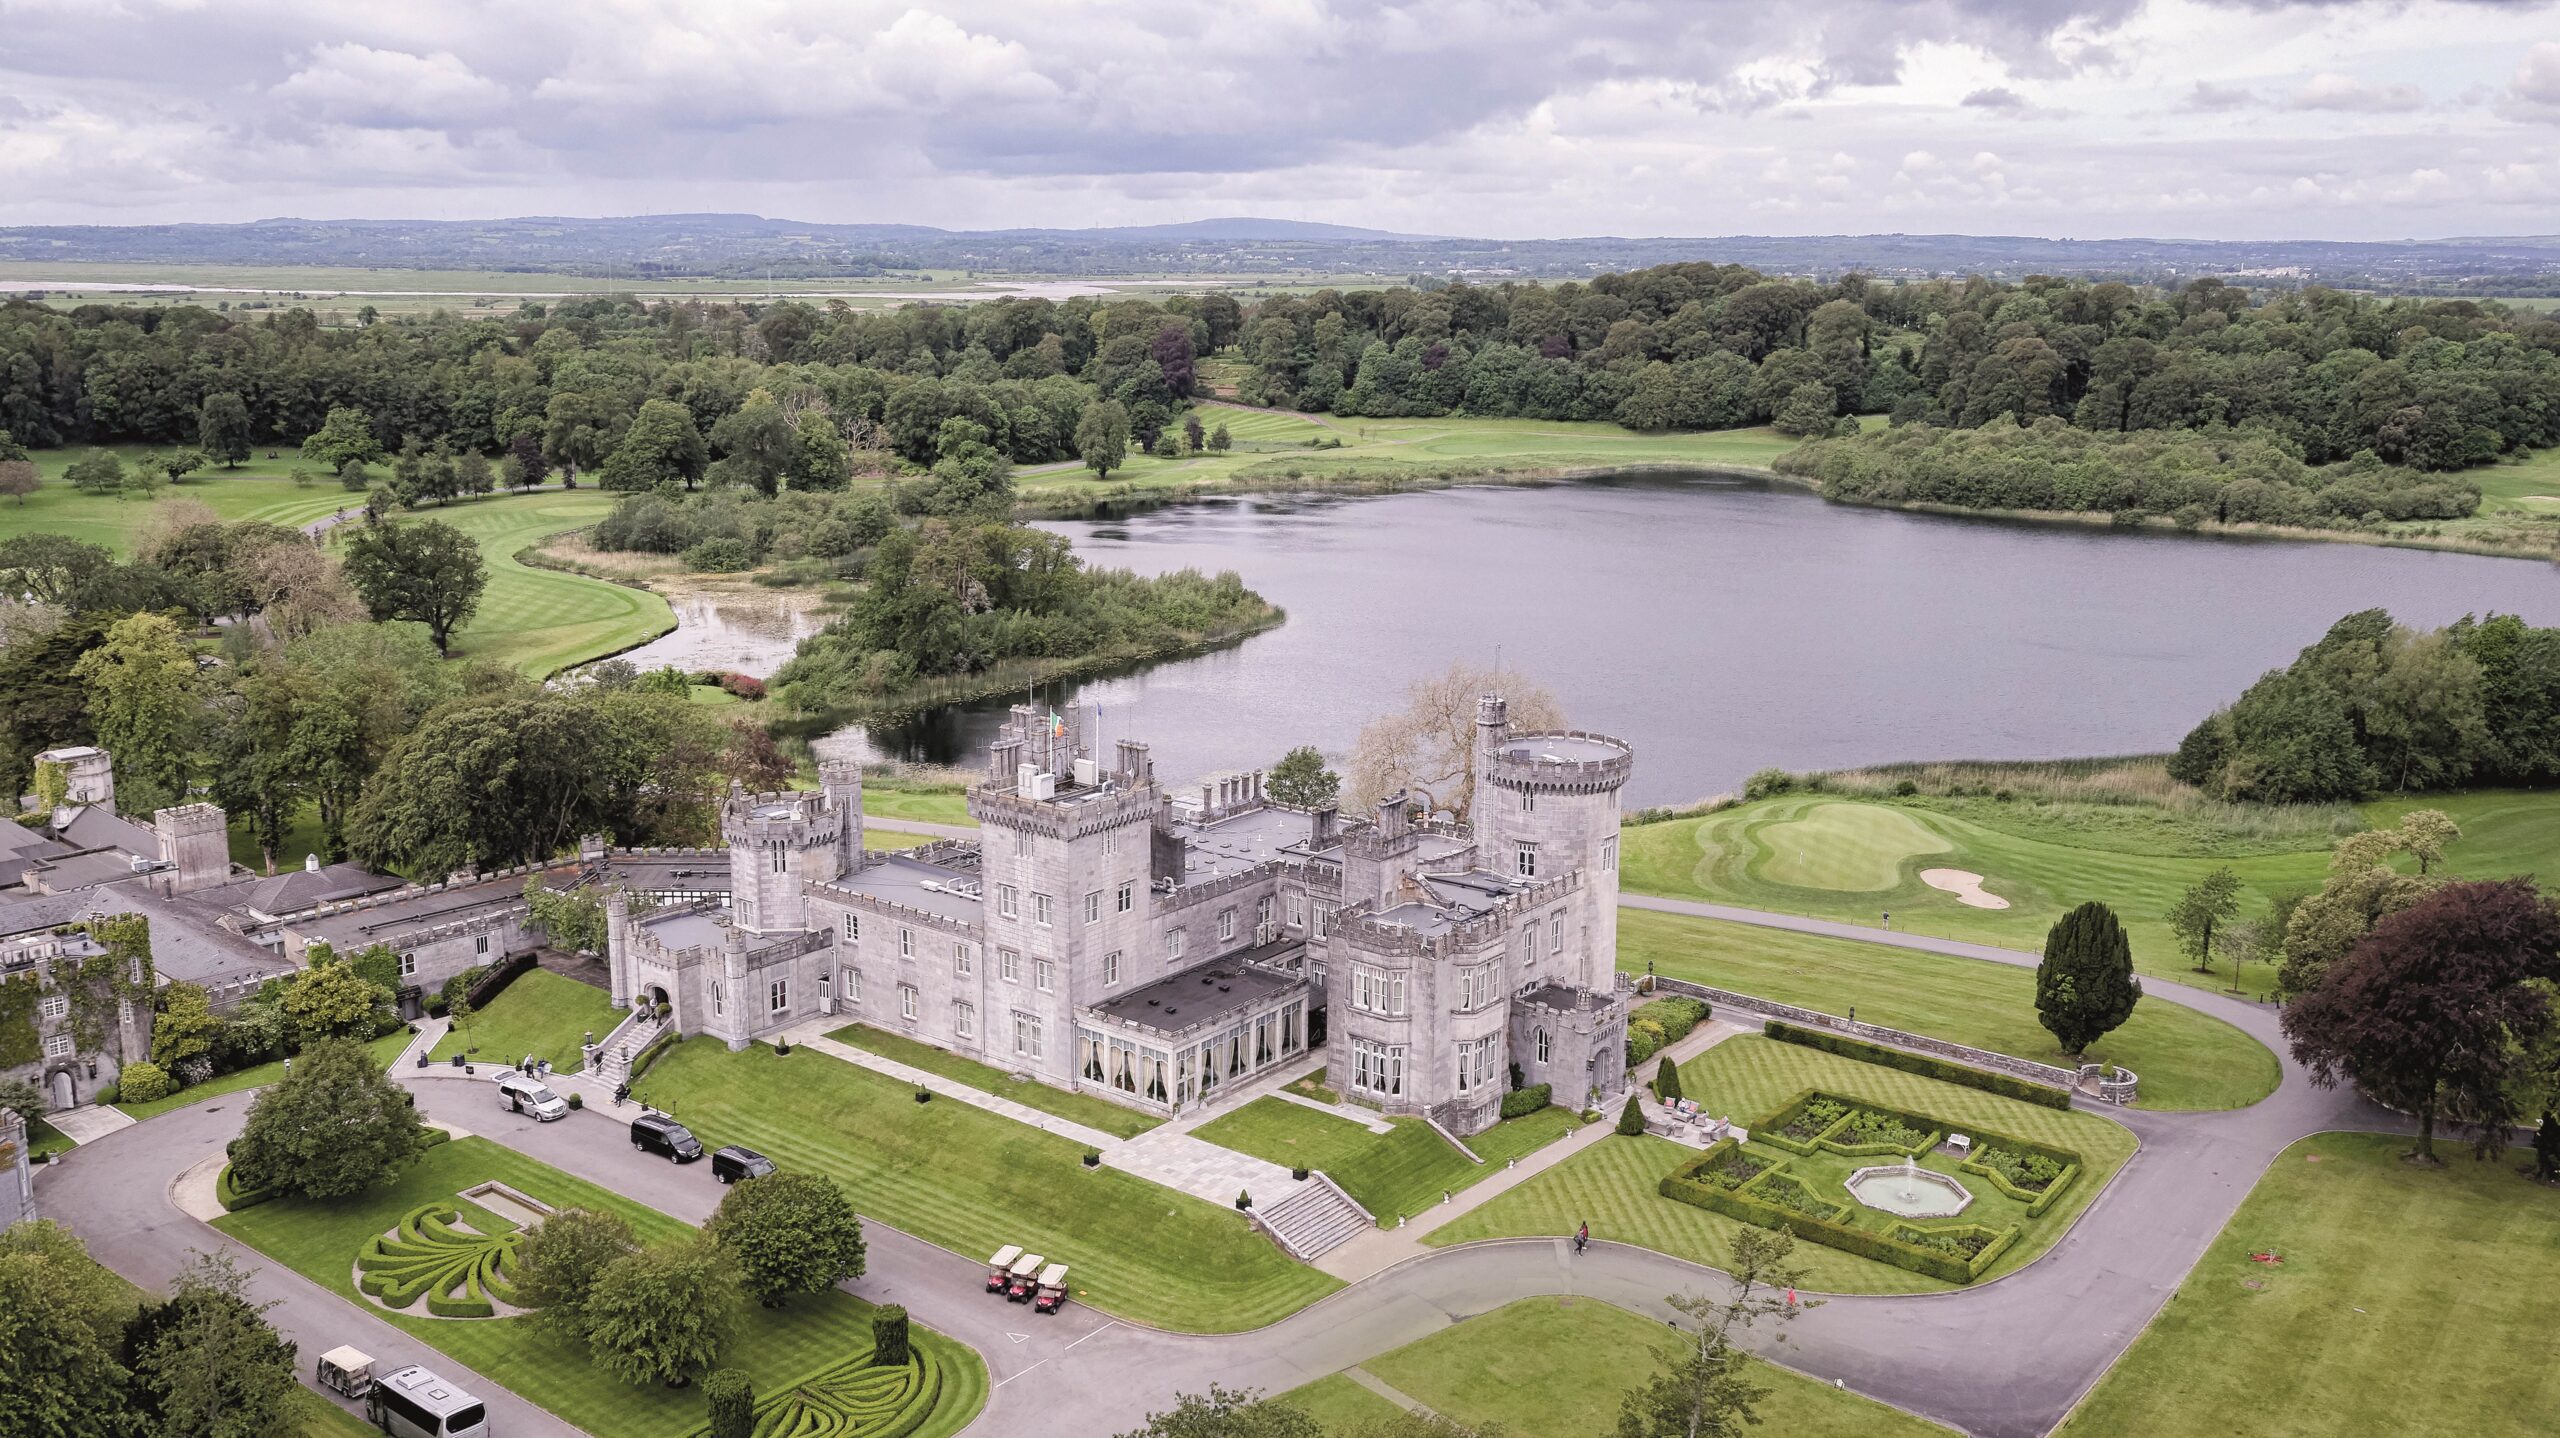 Aerial photograph of Dromoland Castle Castle Hotel - Ireland's Sights & Sounds - Brendan Vacations